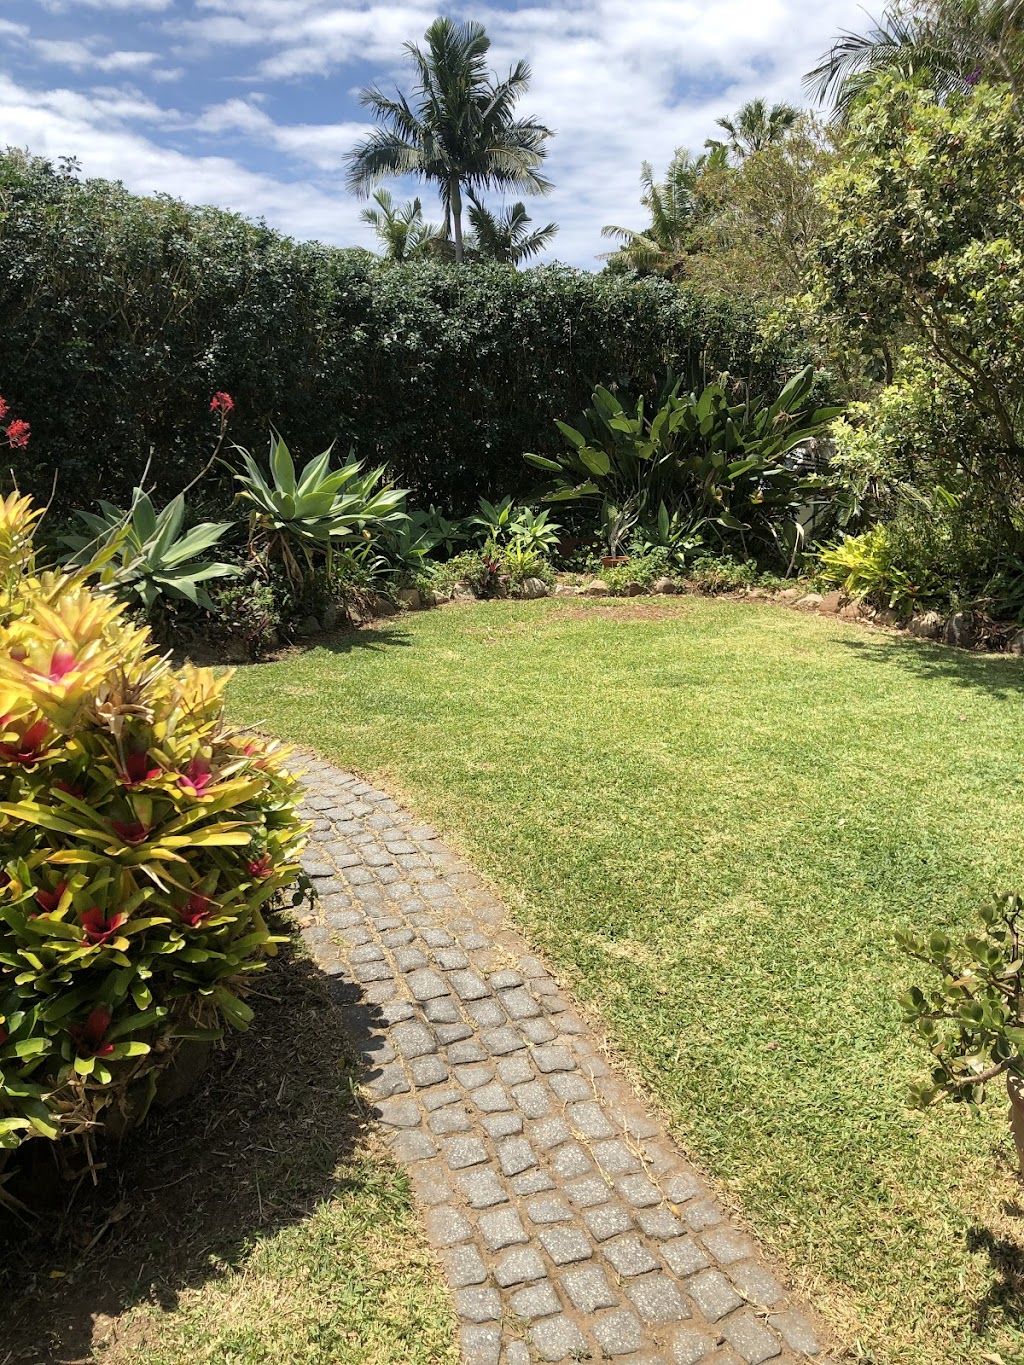 LAWN LOVE MOWING & YARD CARE |  | 33 Coogera Cct, Suffolk Park NSW 2481, Australia | 0431859356 OR +61 431 859 356